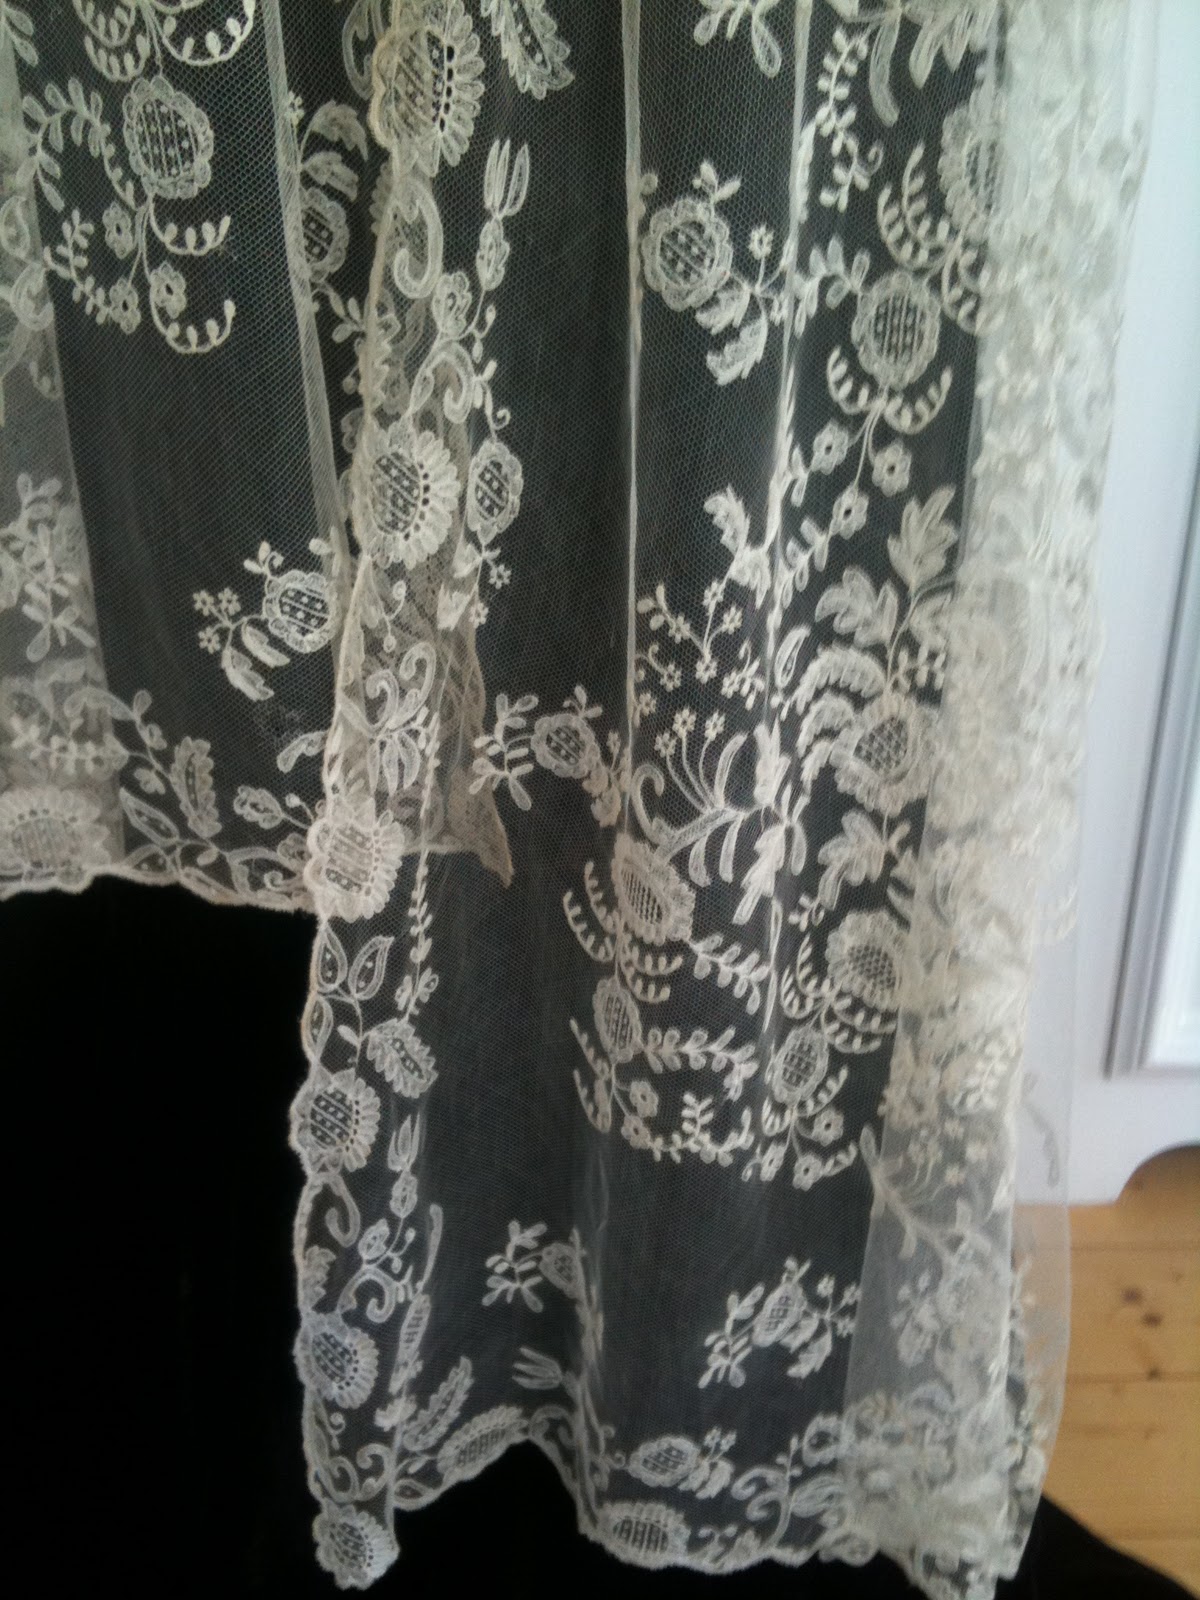 Rosemary Cathcart Antique Lace and Vintage Fashion: Antique Limerick ...